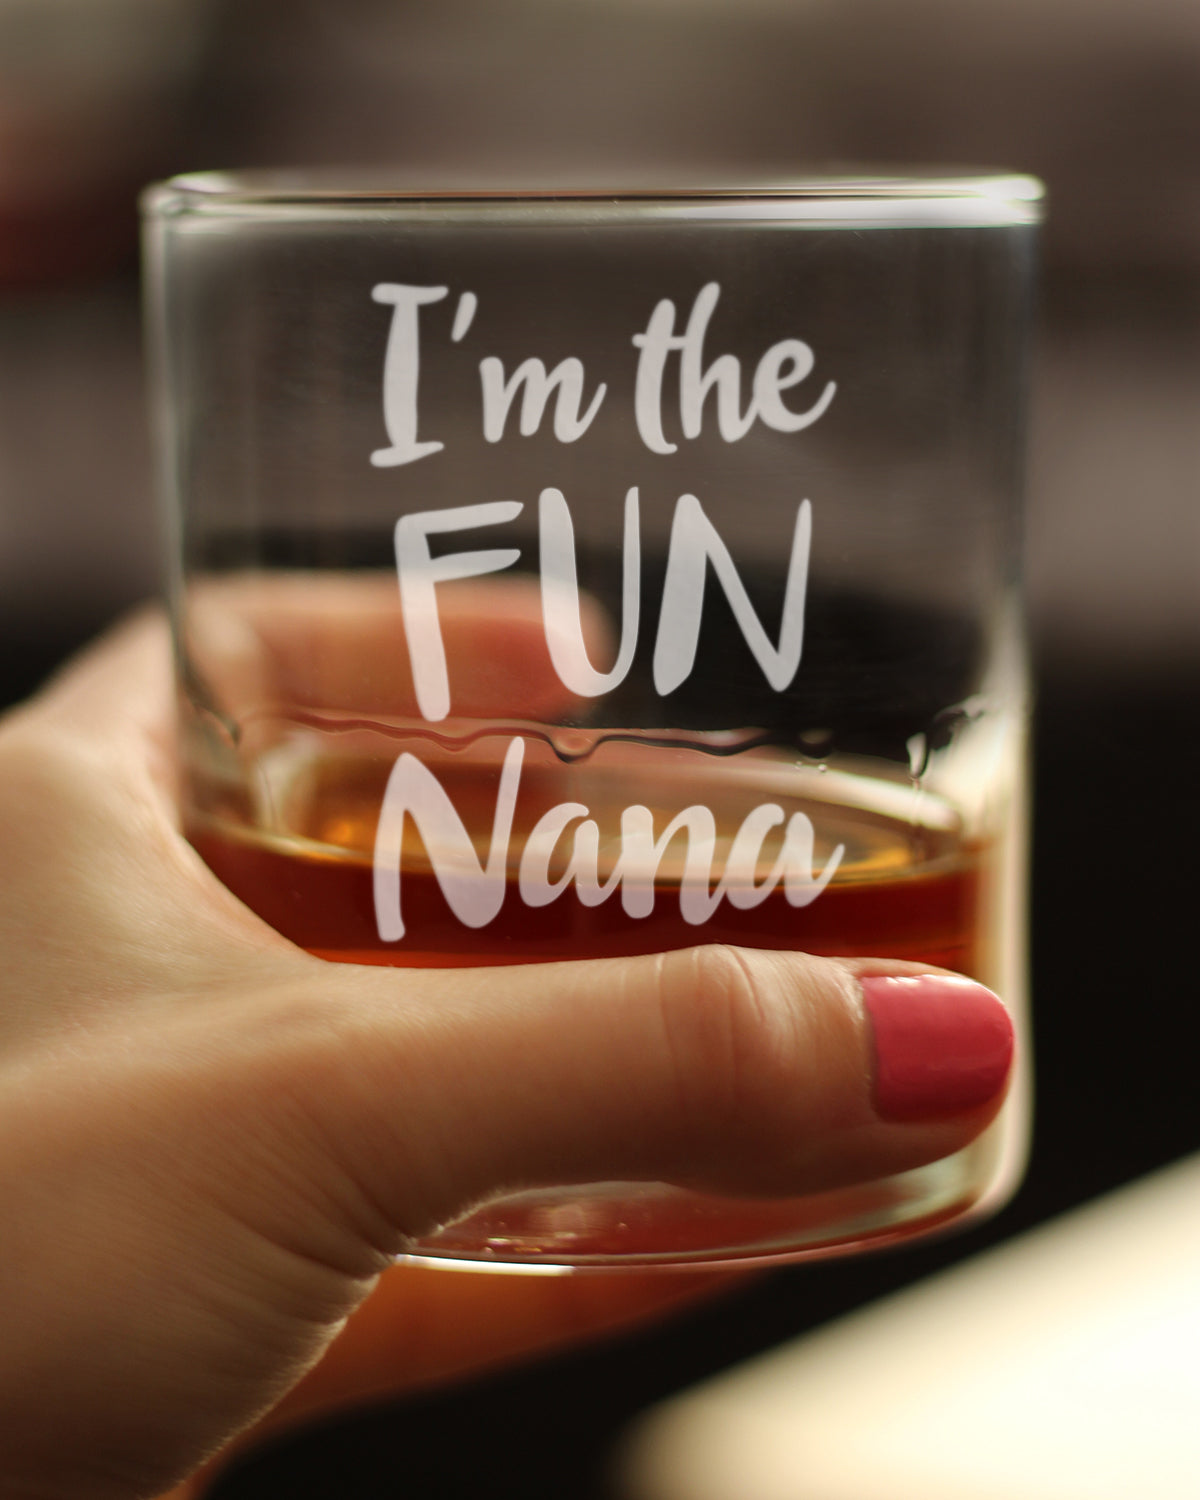 Fun Nana Whiskey Rocks Glass - Cute Grandparents Themed Gifts or Party Décor for Women - 10.25 Oz